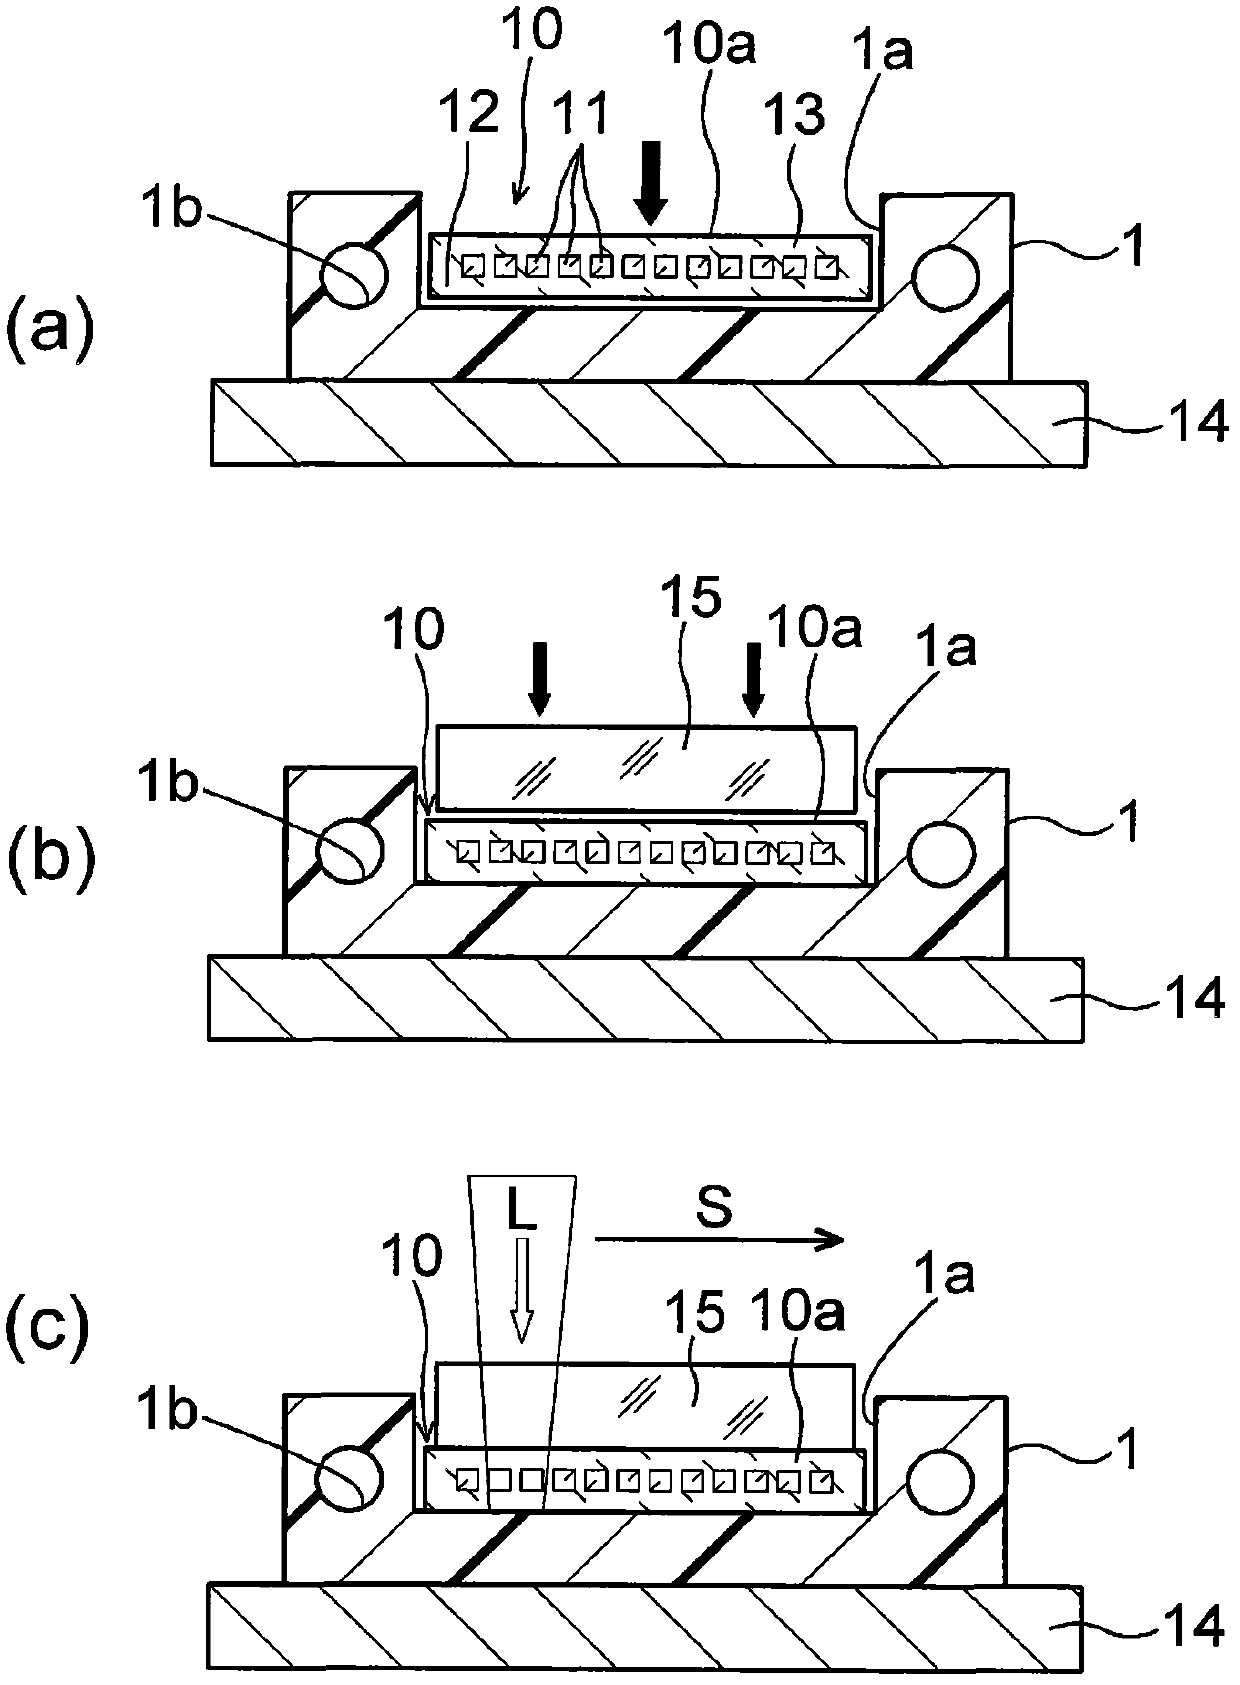 Manufacturing method for an optical connector